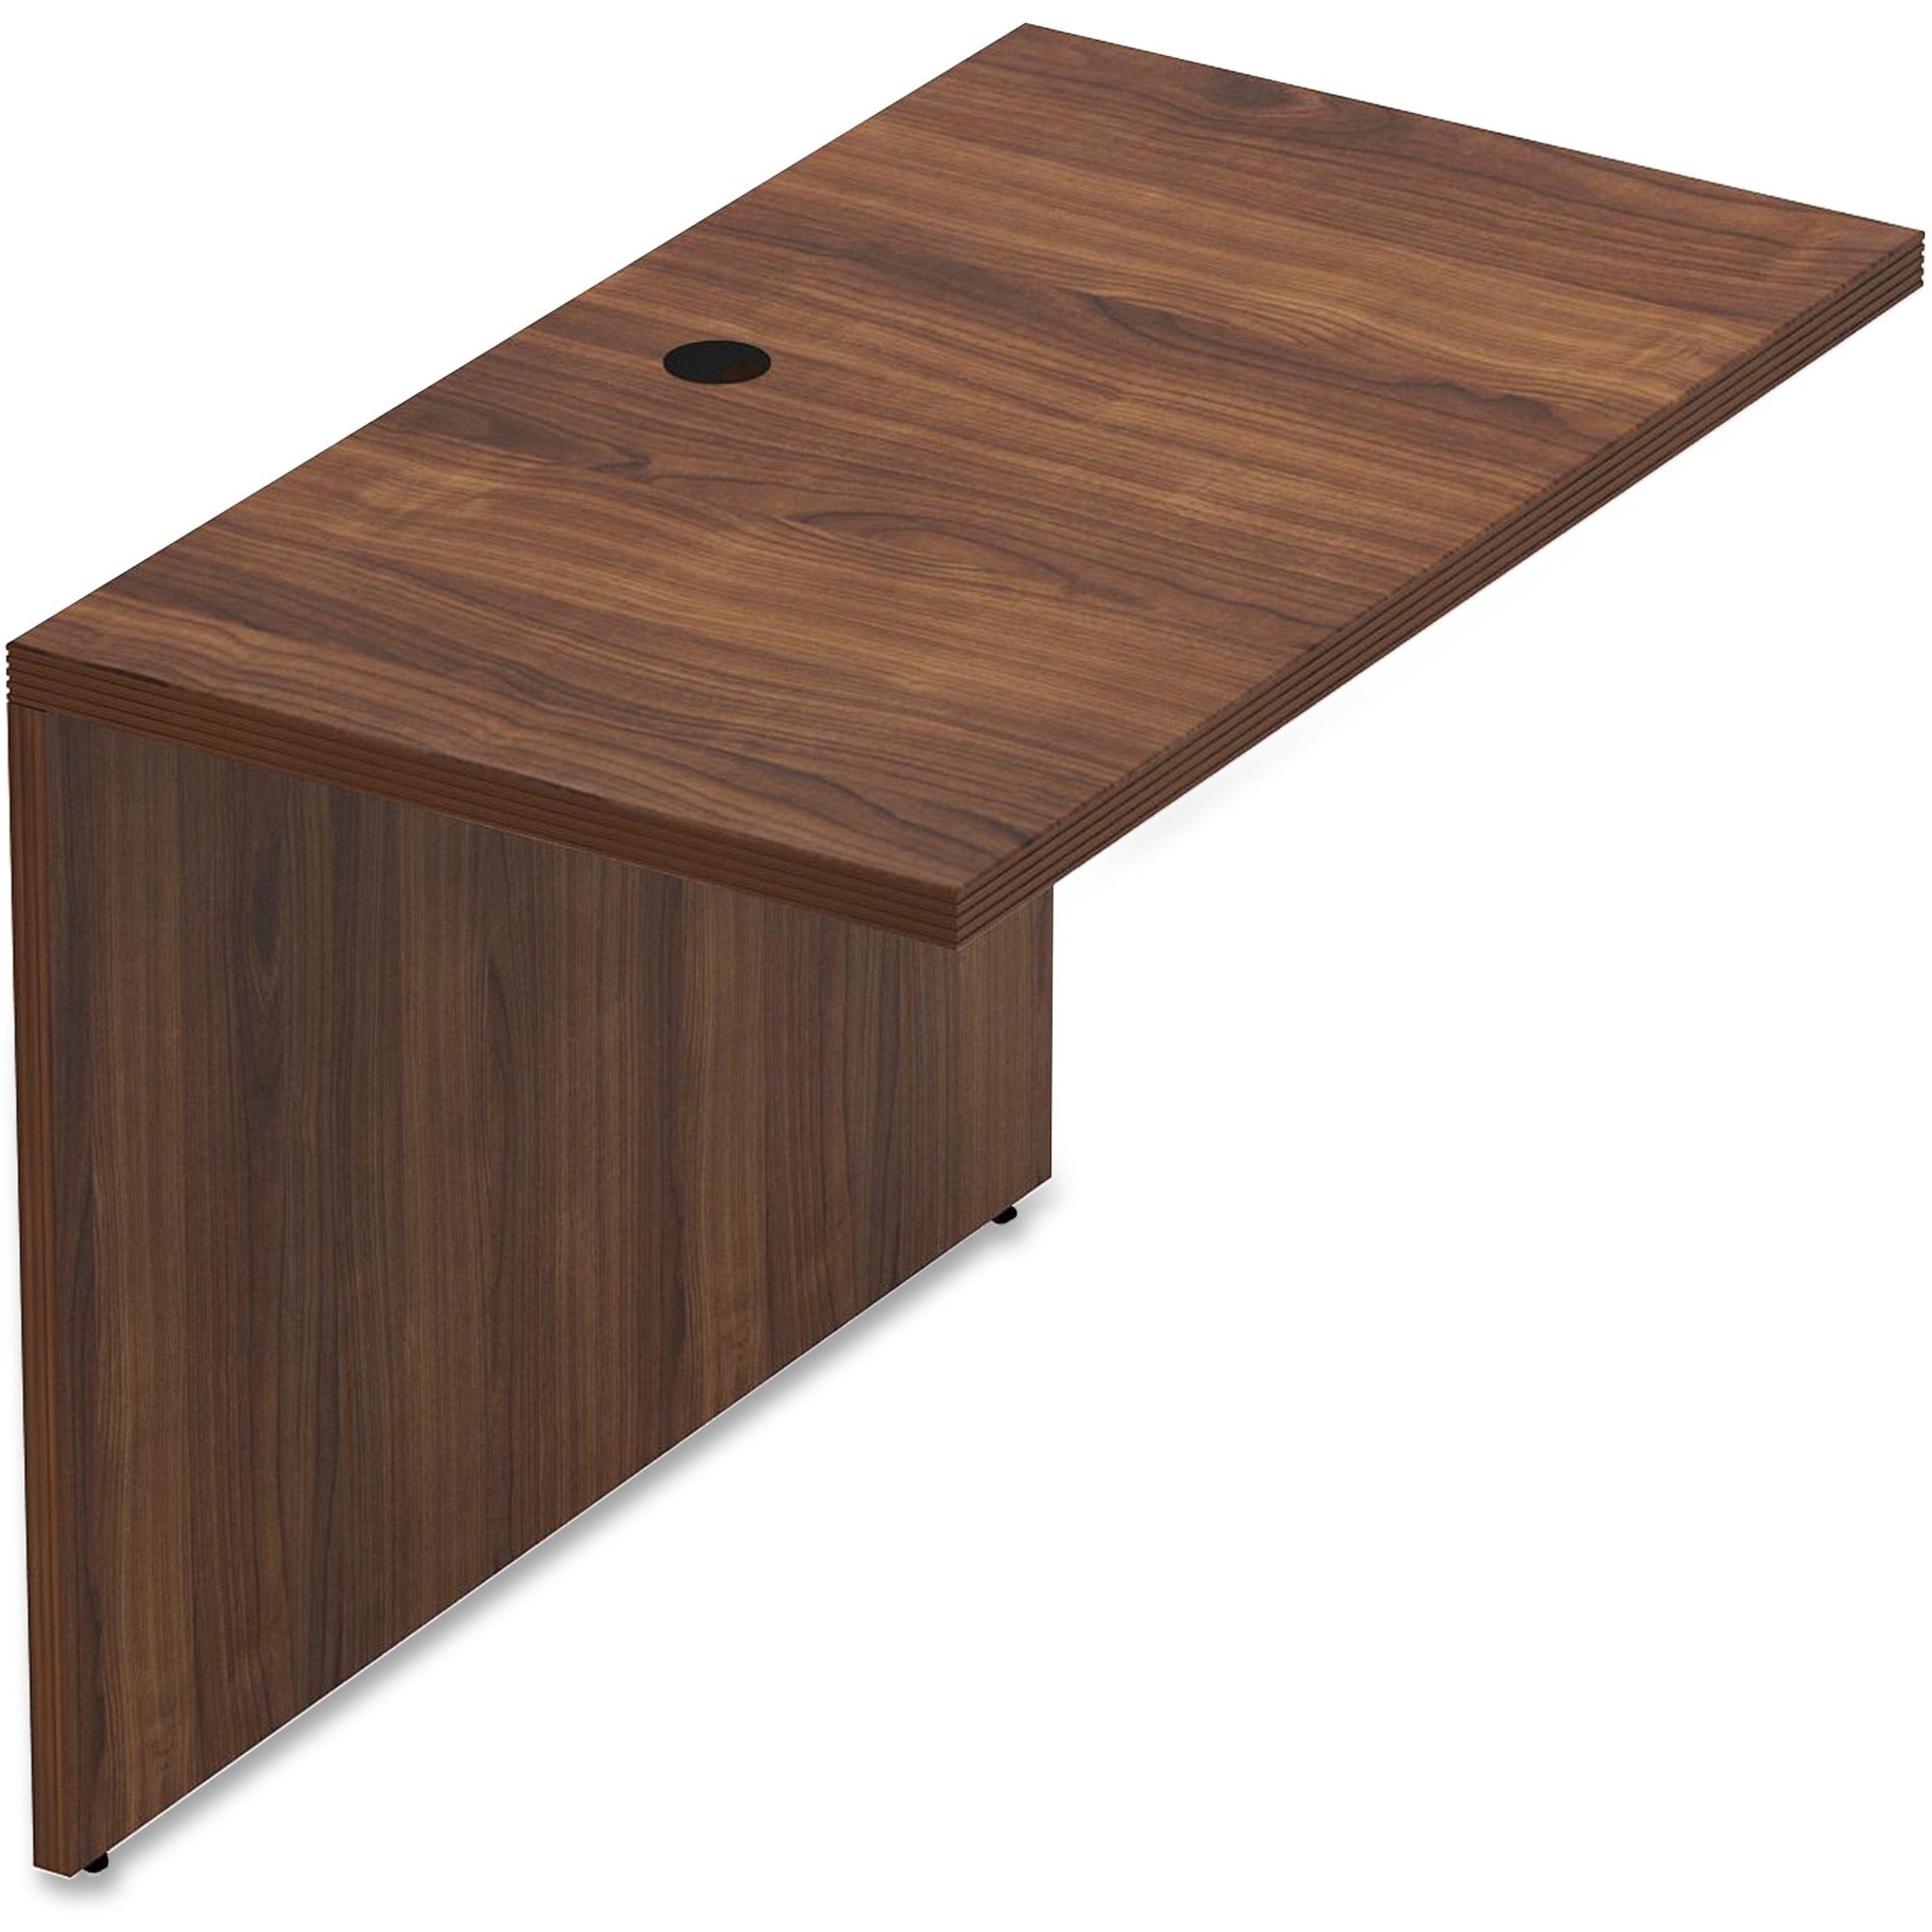 Lorell Chateau Series Bridge - 41.4" x 23.6"30" Bridge, 1.5" Top - Reeded Edge - Material: P2 Particleboard - Finish: Mahogany, Laminate - Durable, Grommet, Modesty Panel, Cord Management - For Office - 